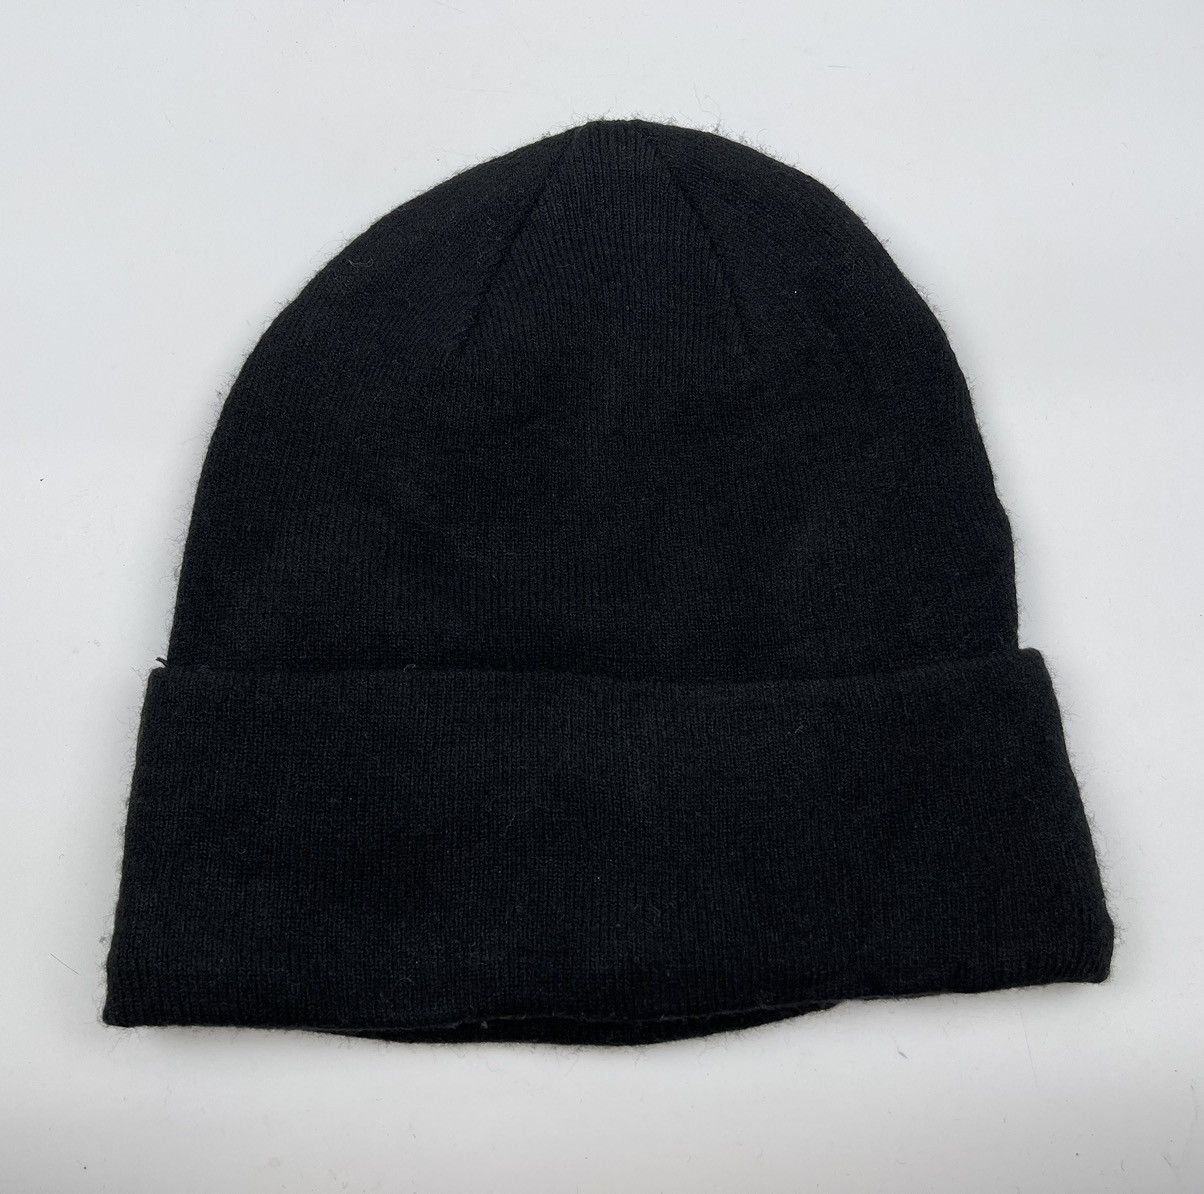 H&M - meow beanie hat with ear - 6